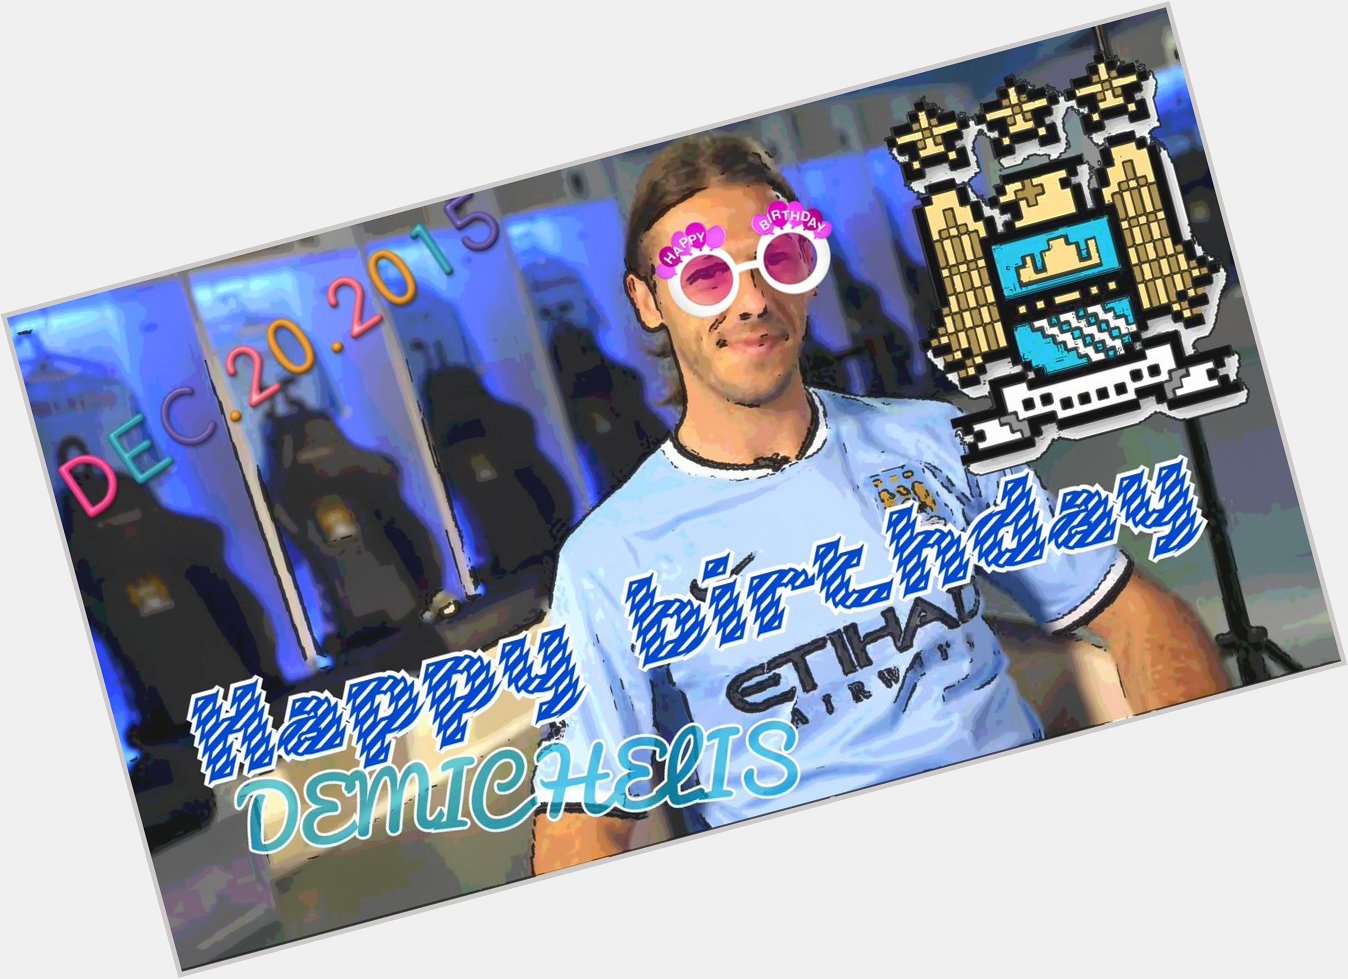 Happy birthday     MARTIN DEMICHELIS
As it becomes a spectacular year  